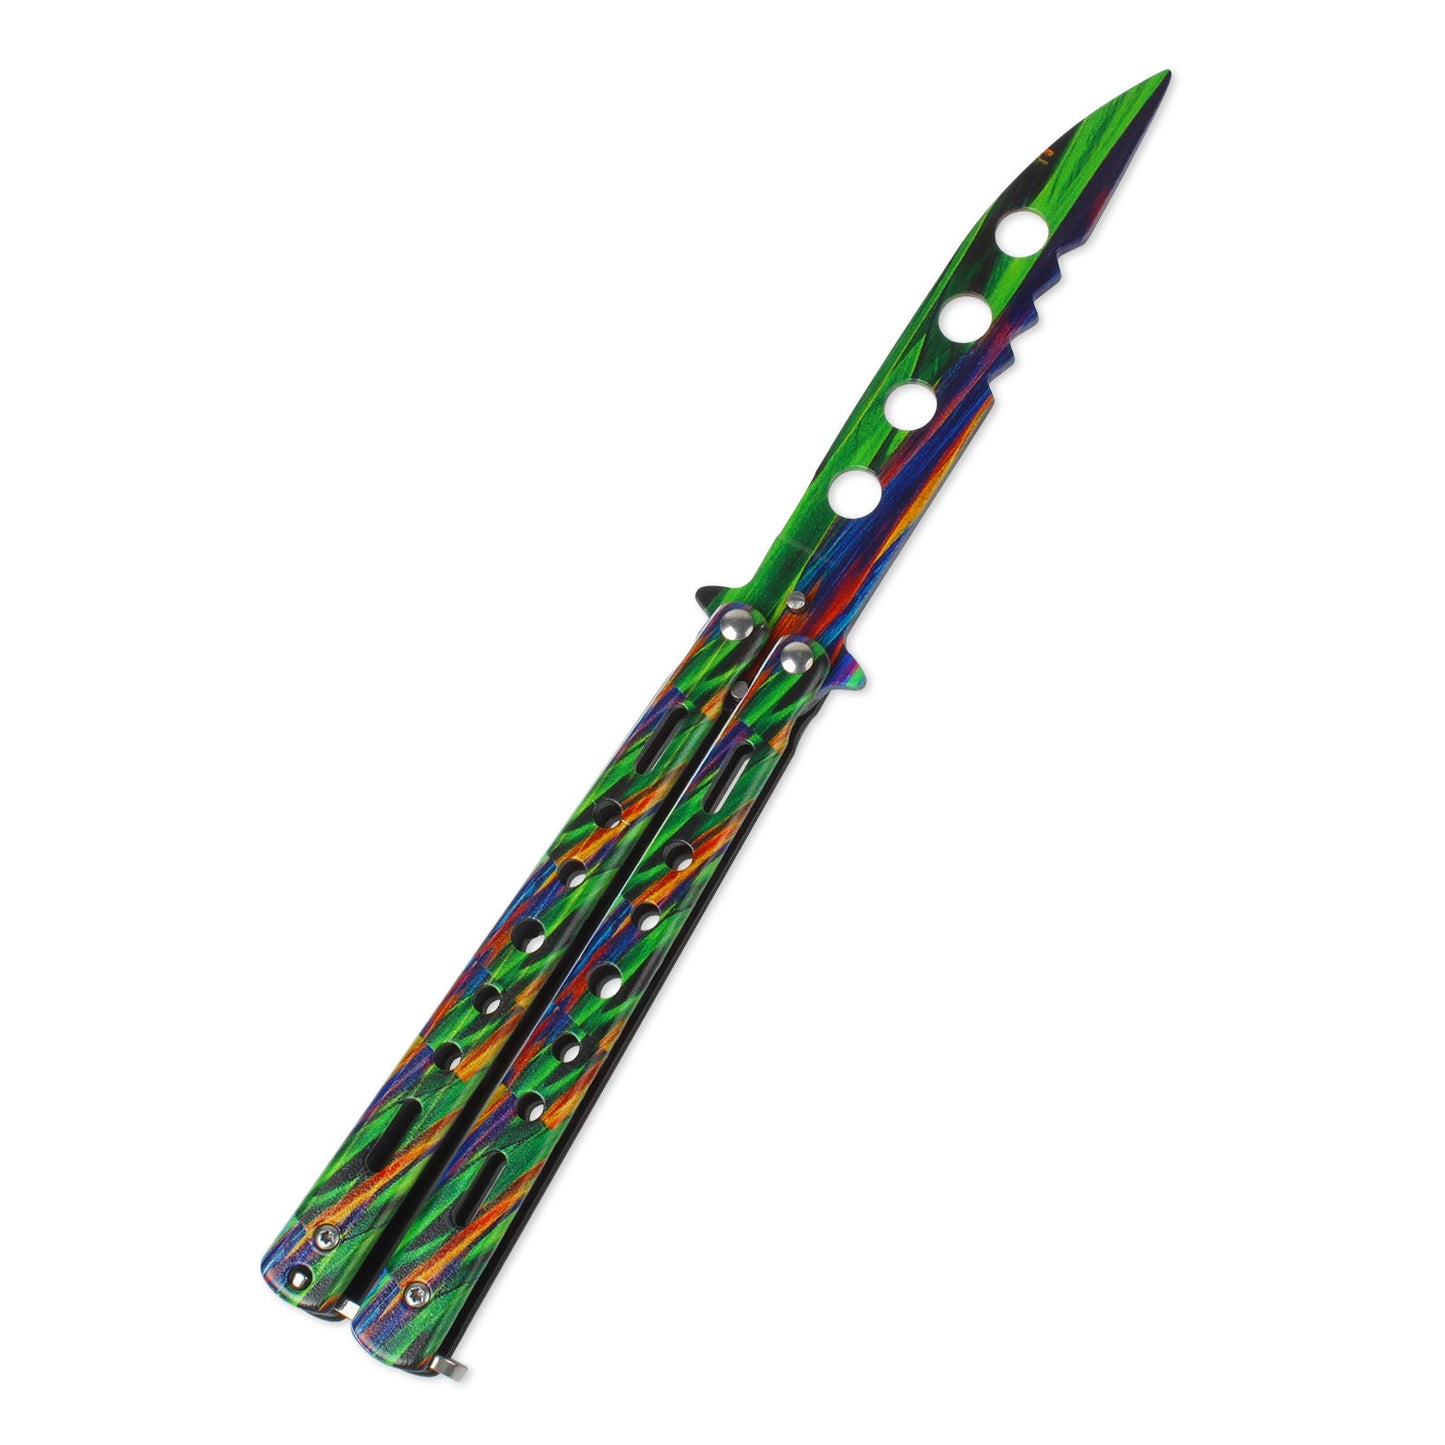 Andux Balisong Butterfly Knife Stainless Steel Training Tool (Green) BLCS580